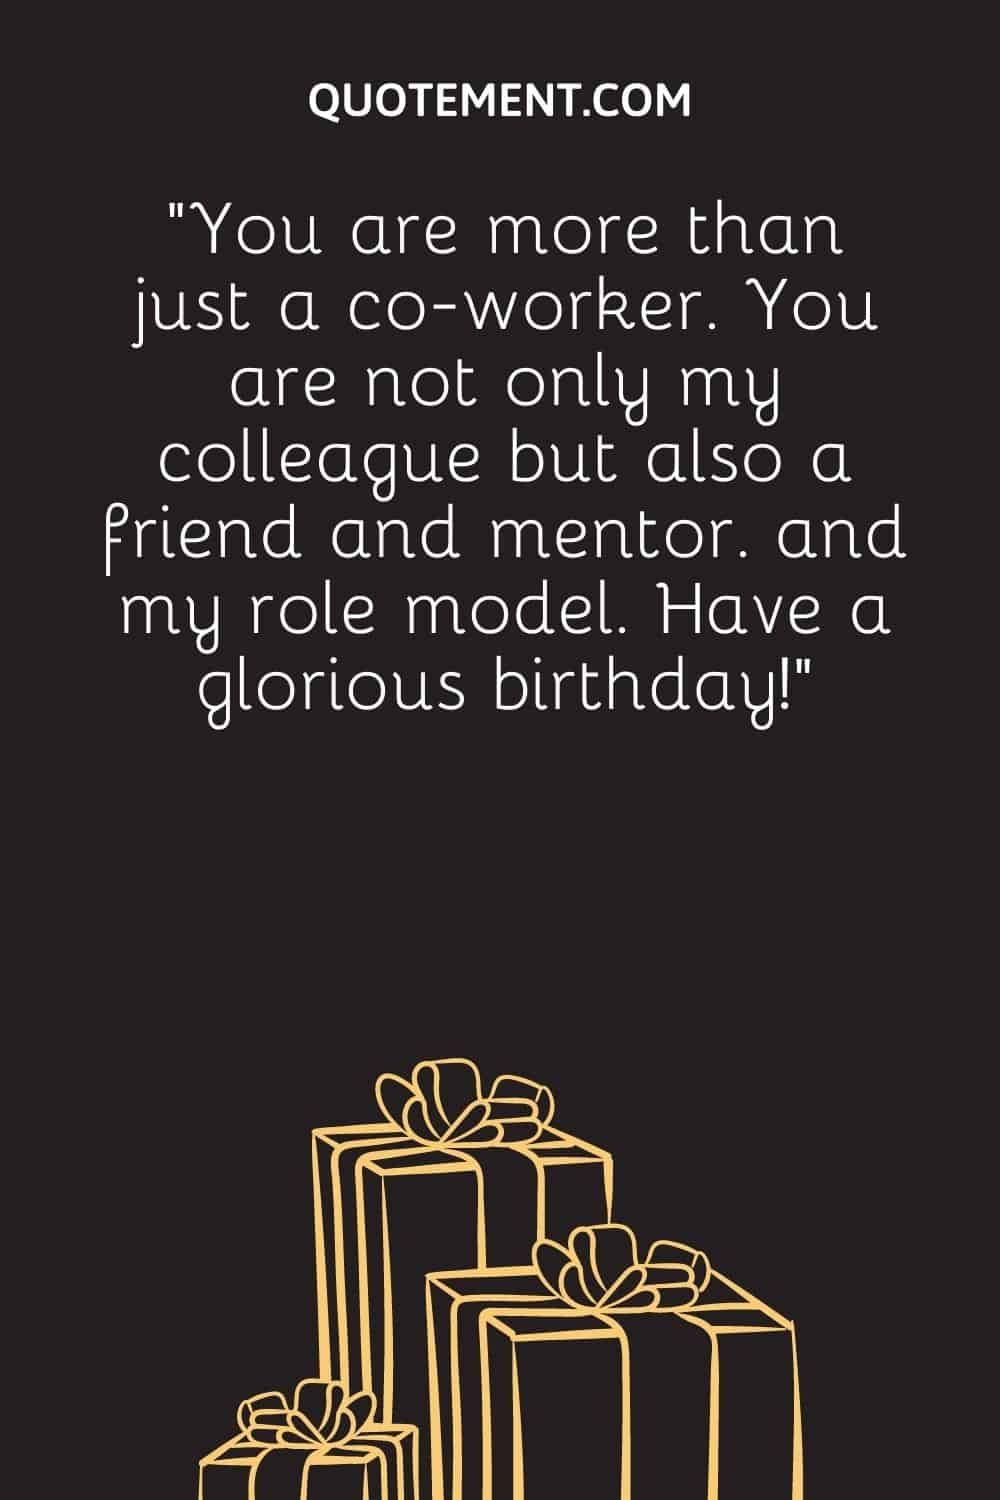 “You are more than just a co-worker. You are not only my colleague but also a friend and mentor. and my role model. Have a glorious birthday!”